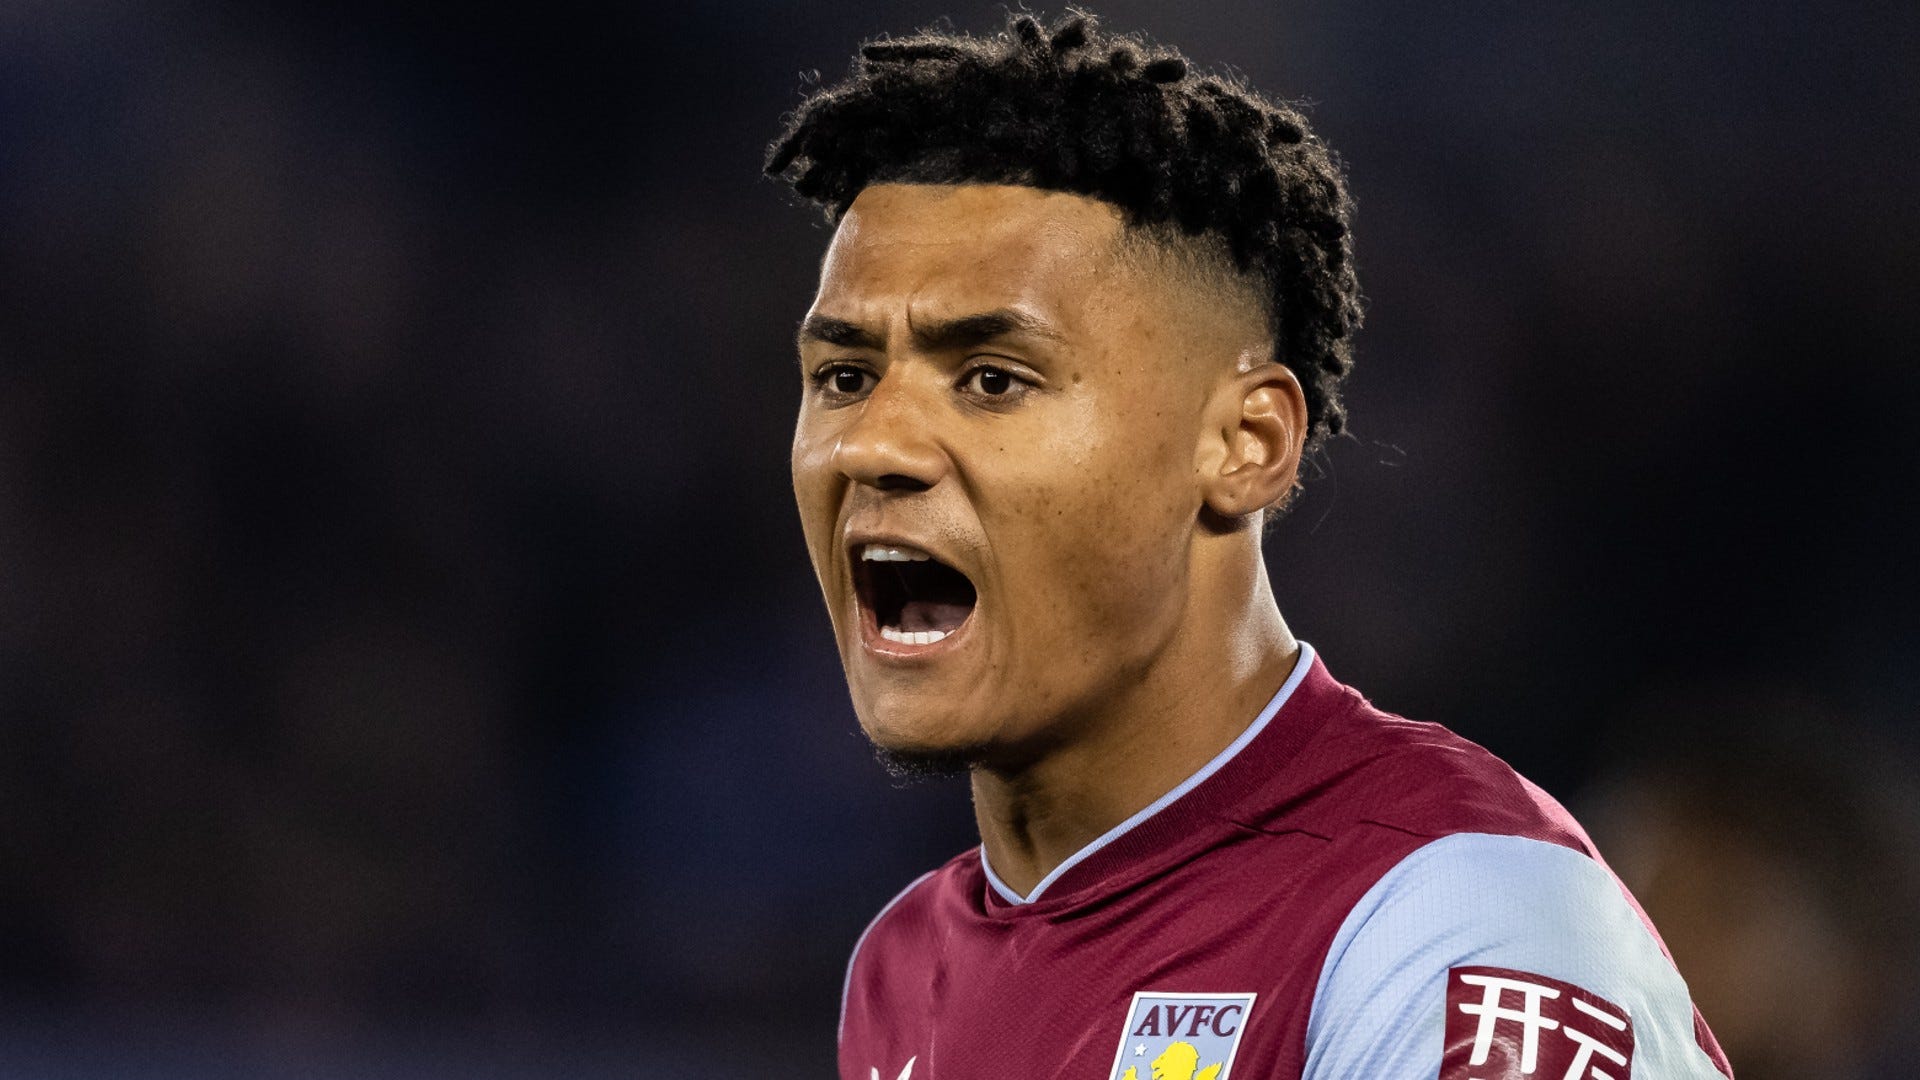 Aston Villa vs Fulham Where to watch the match online, live stream, TV channels and kick-off time Goal US